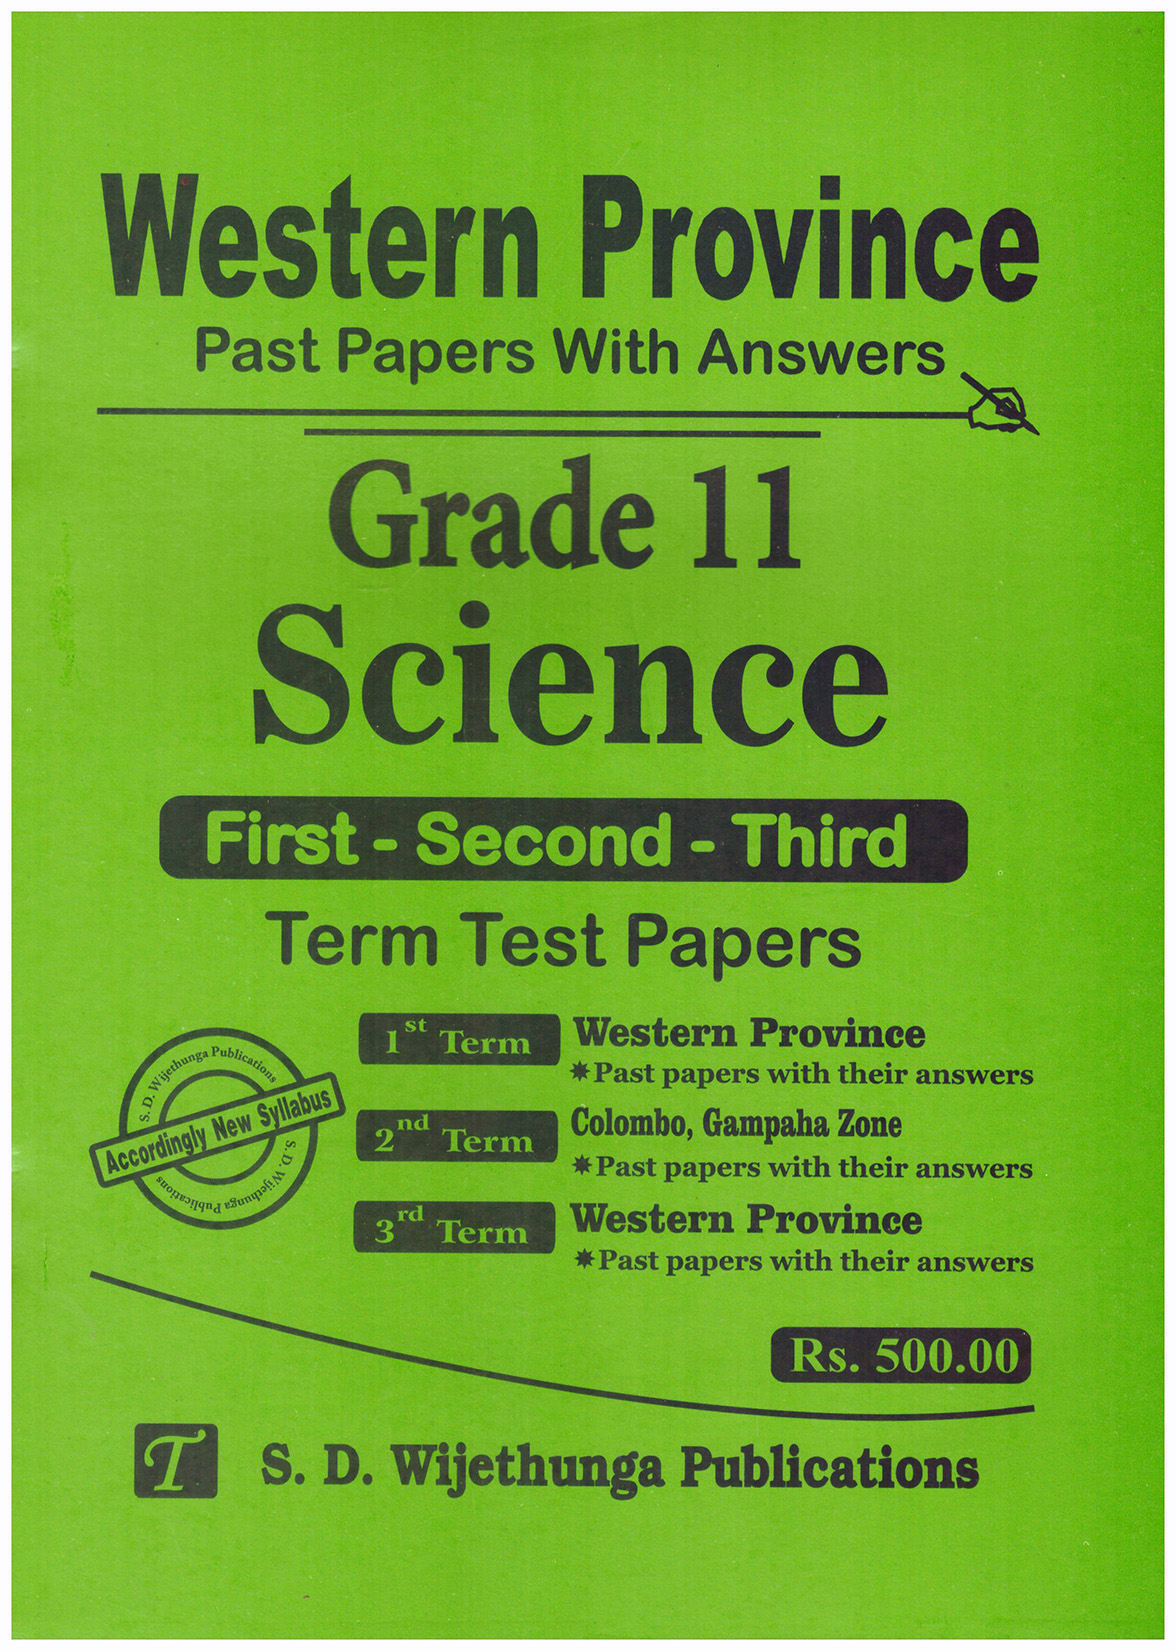 Western Province Grade 11 Science Past Papers with Answers